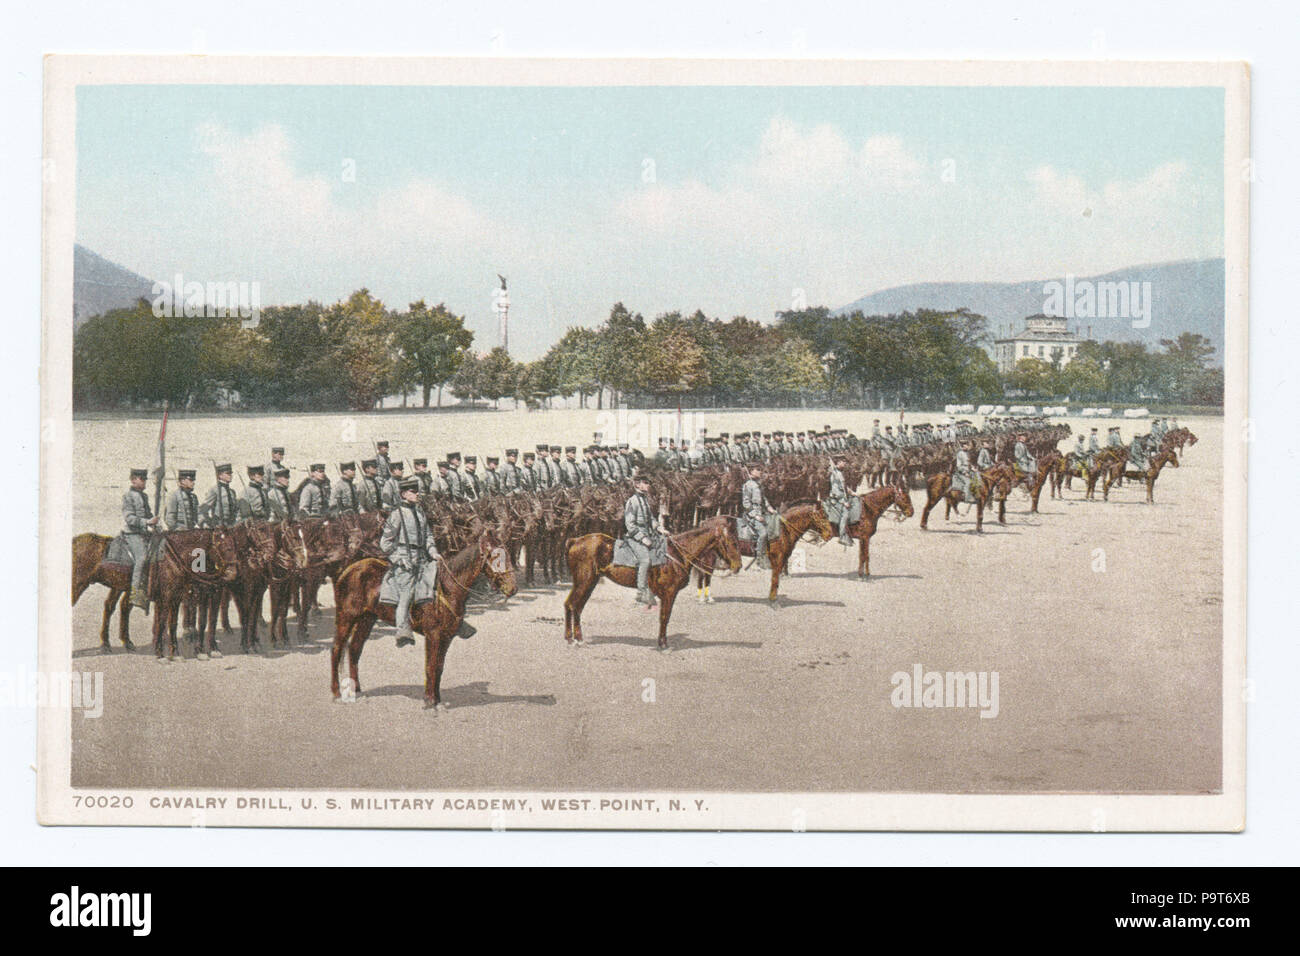 290 Kavallerie bohren, US Military Academy, West Point, N. Y (Nypl b 12647398-73774) Stockfoto